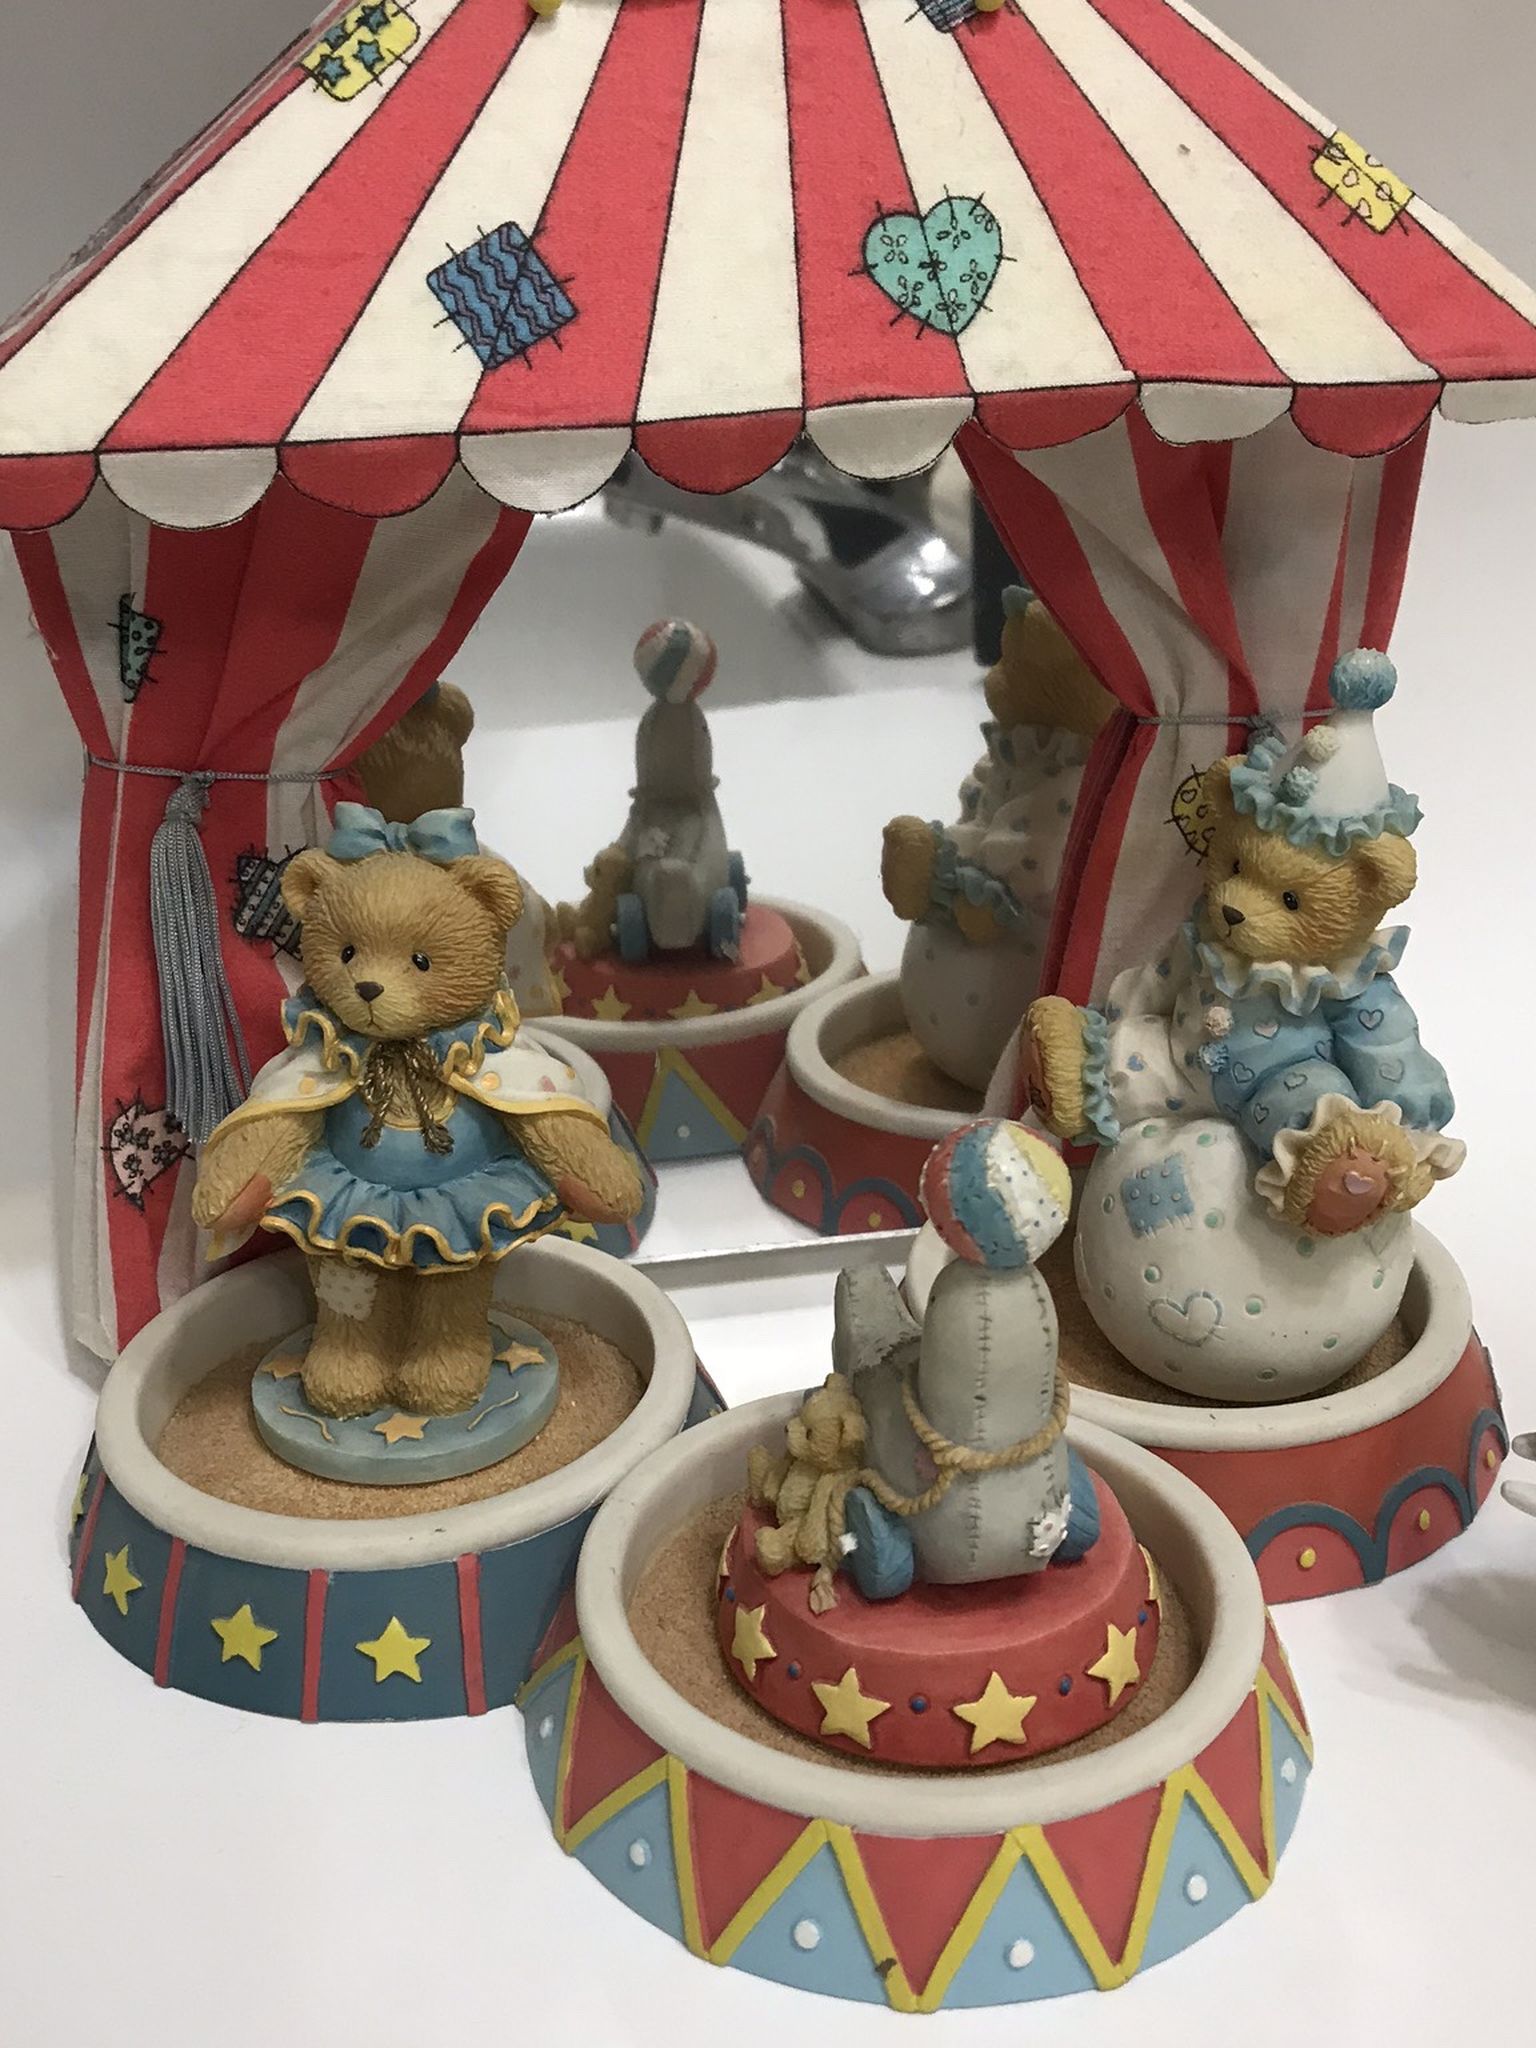 Cherished Teddies “Circus is In Town”